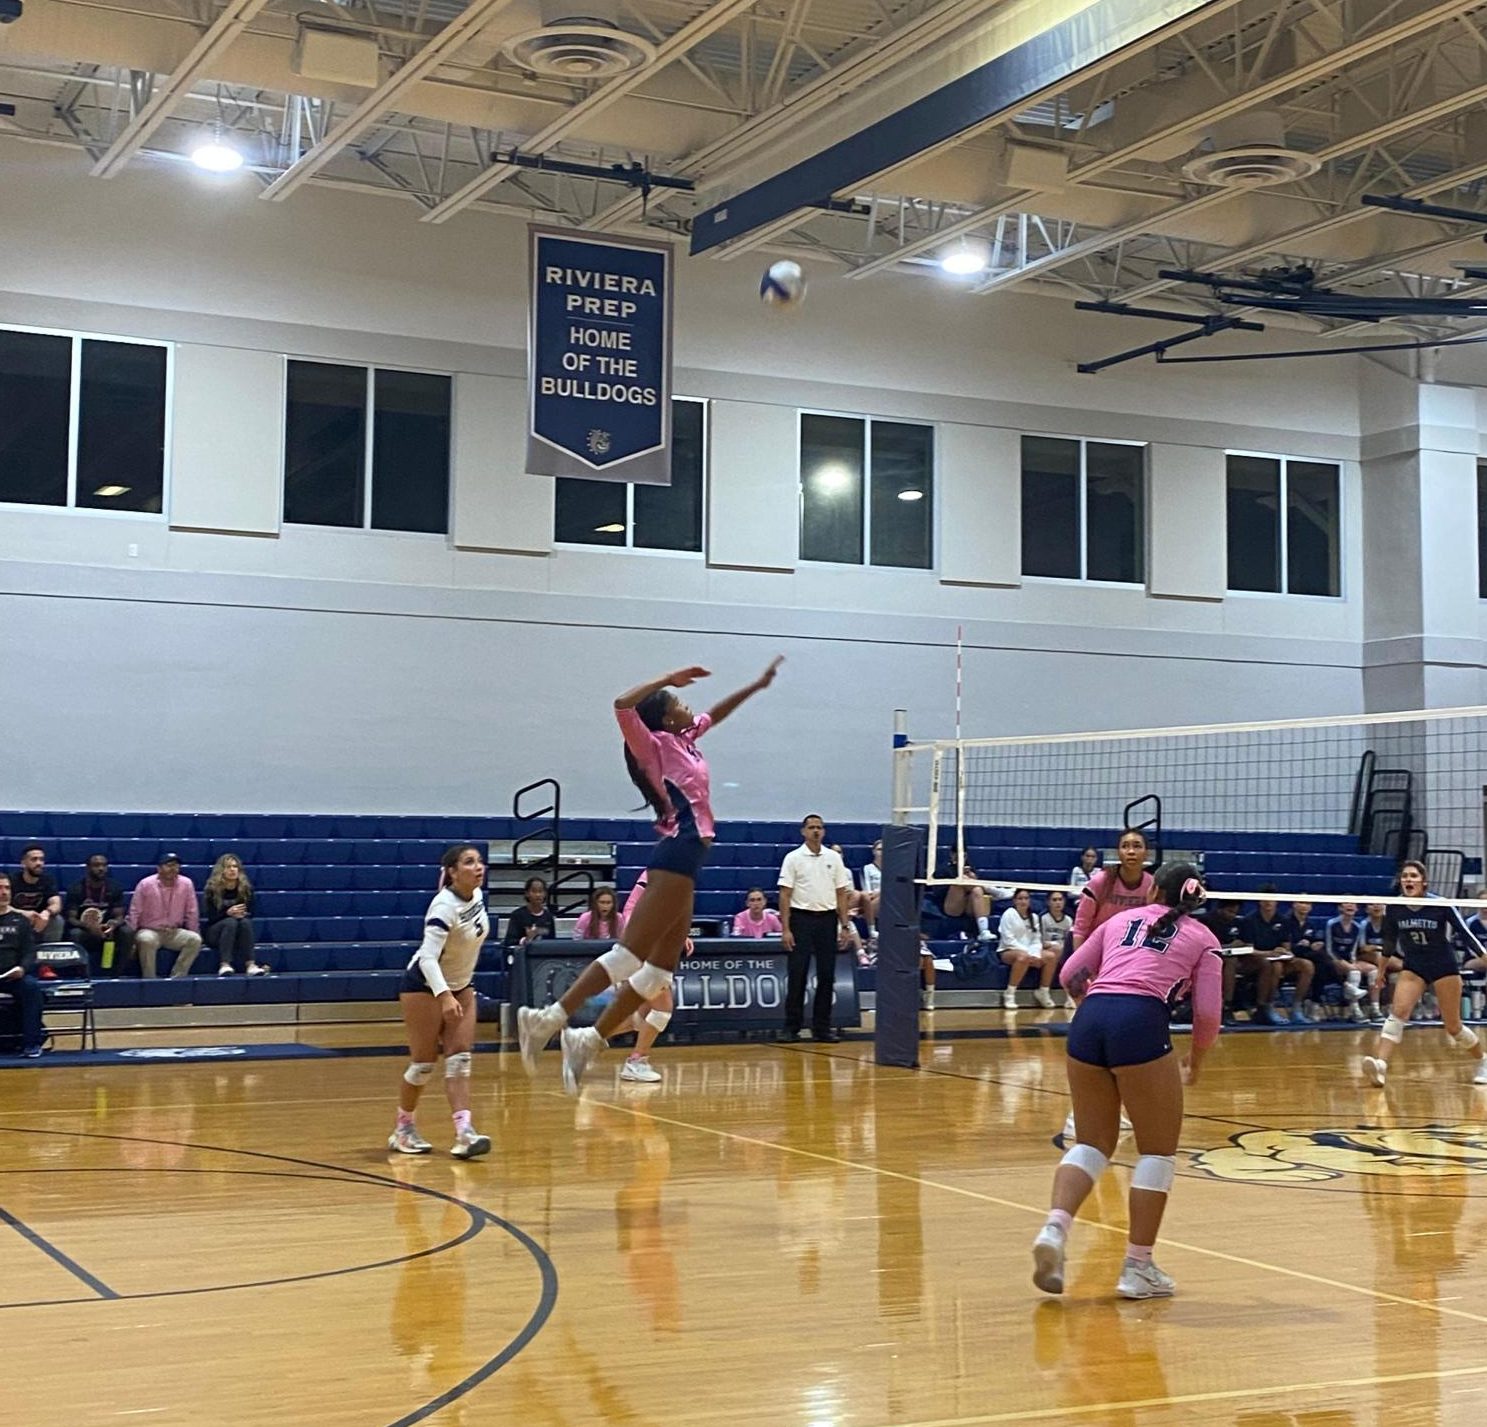 Sydney Zanca takes flight to deliver a strike from the backrow.